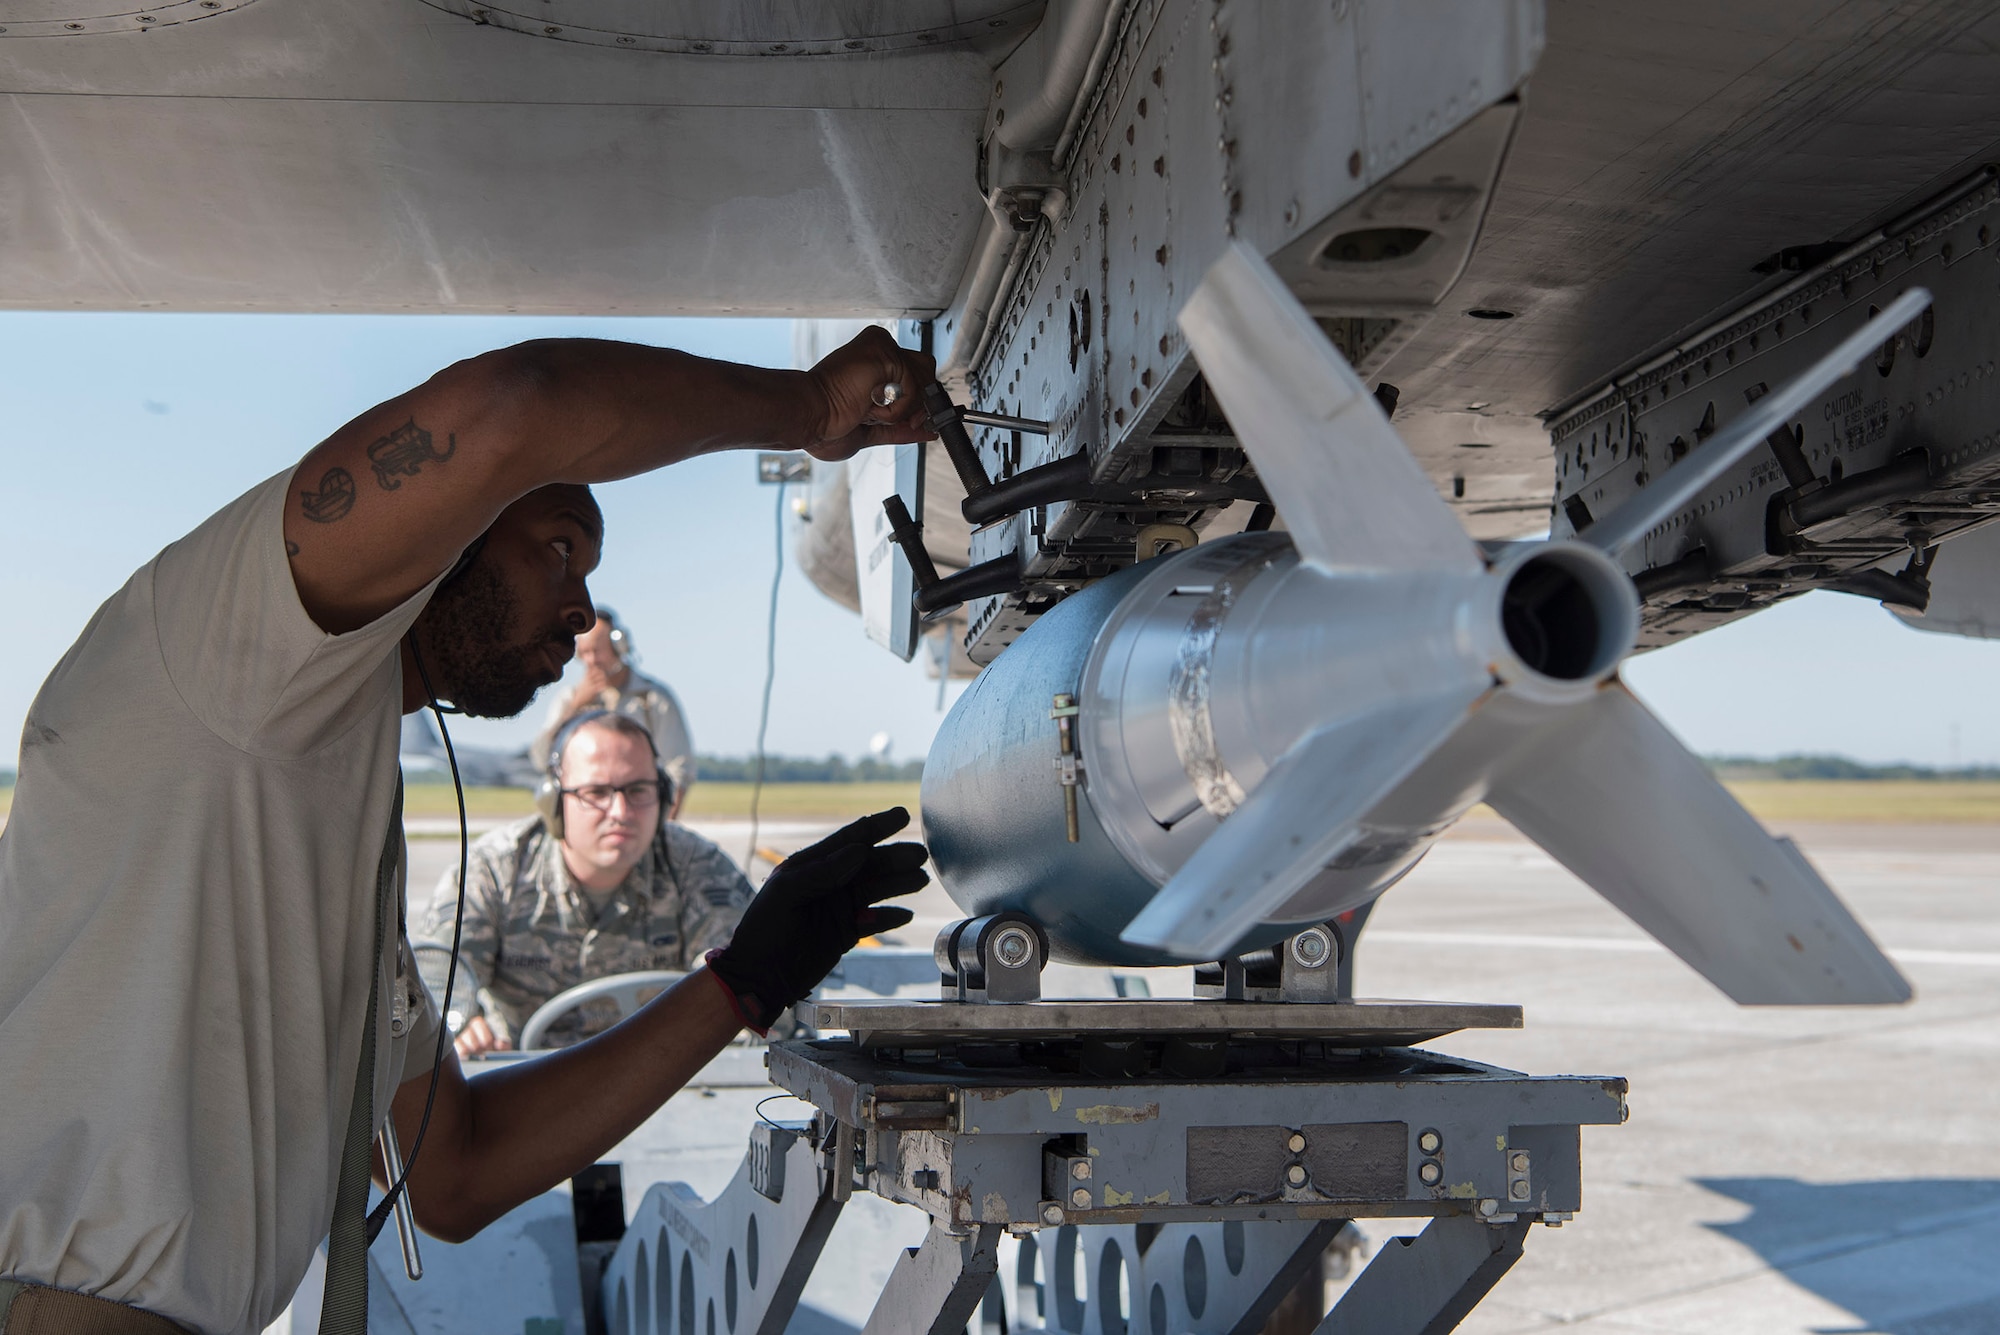 Airmen assigned to the 23rd Aircraft Maintenance Squadron, Moody Air Force Base, Ga., load munitions on an A-10 Thunderbolt II aircraft assigned to the 74th Fighter Squadron Moody AFB during exercise Mobil Tiger on MacDill Air Force Base, Fla., Nov. 20, 2019.